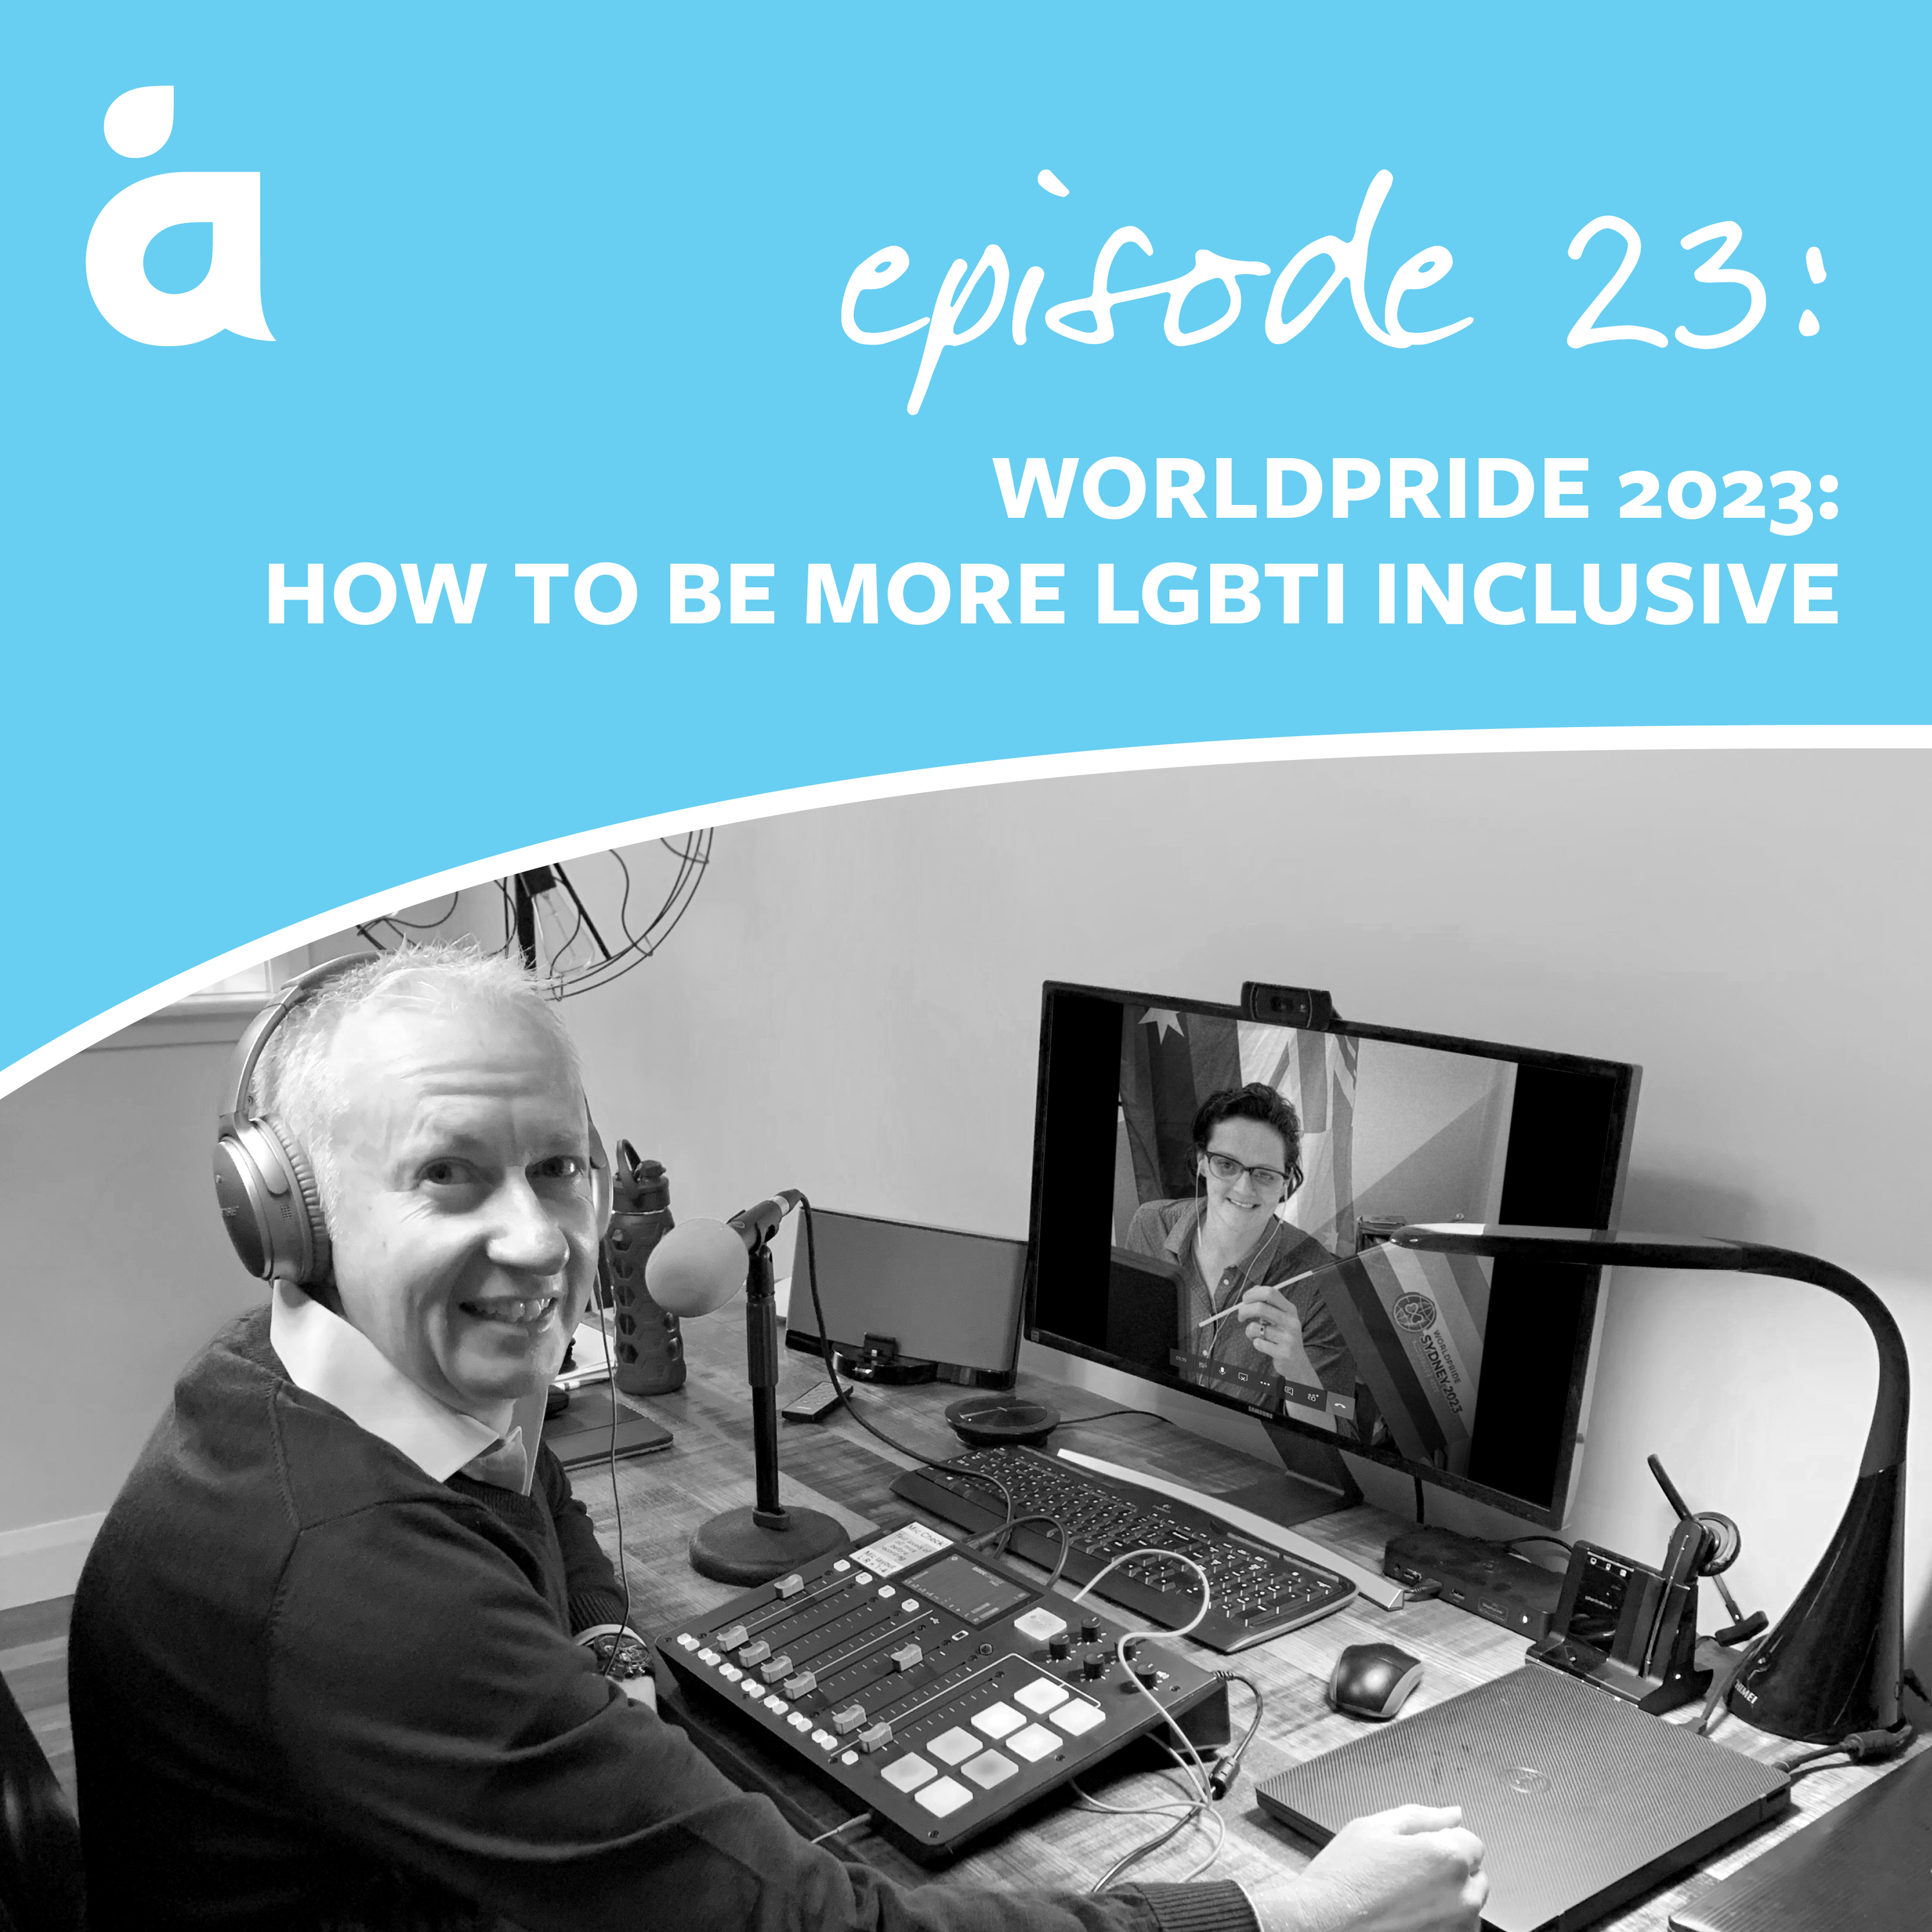 WorldPride 2023: how to be more LGBTI inclusive